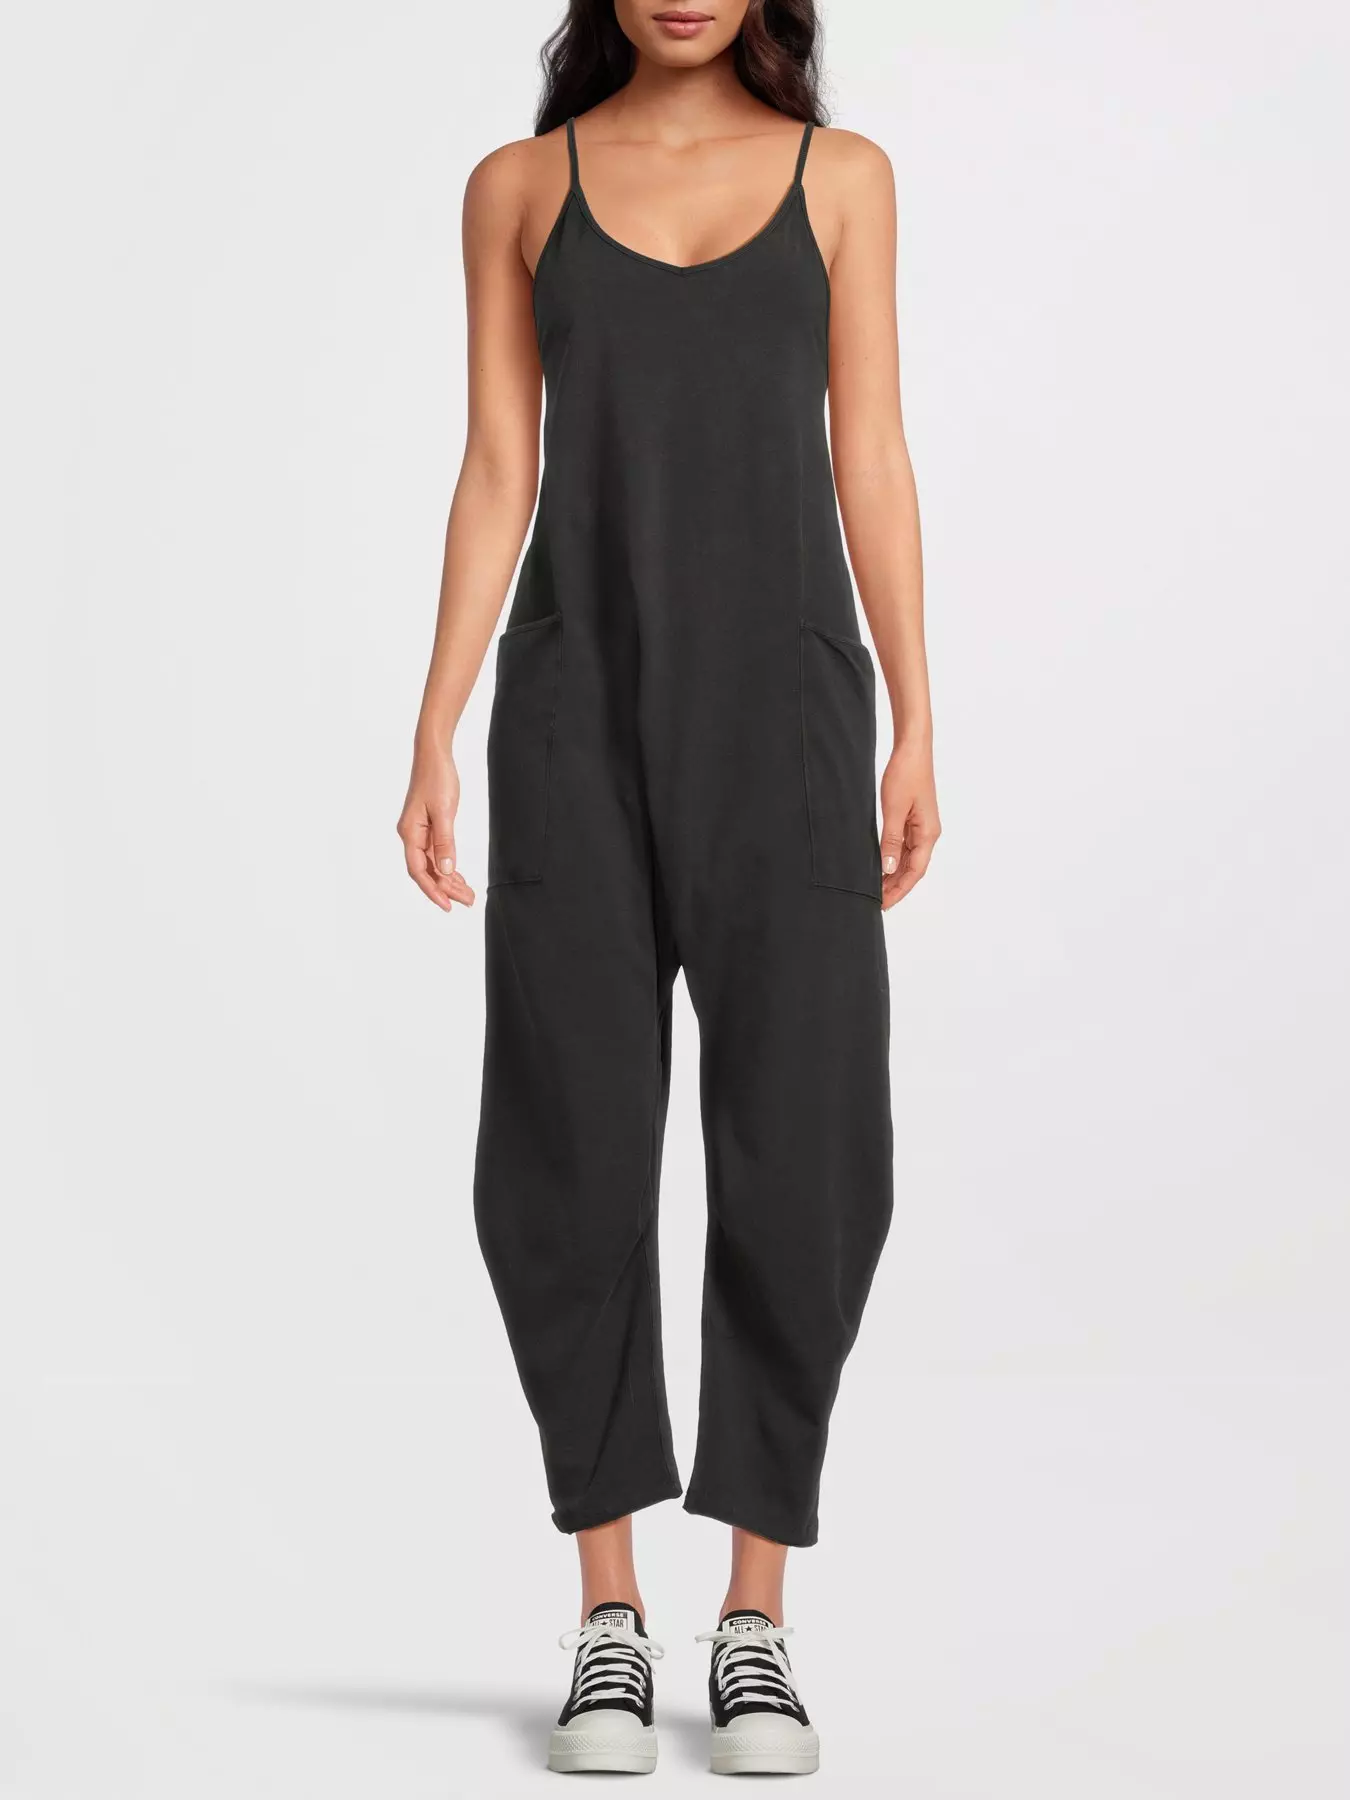 Free People, Pants & Jumpsuits, Free People Nwt Cozy All Day Harem  Leggings Washed Drawstring Black Small New